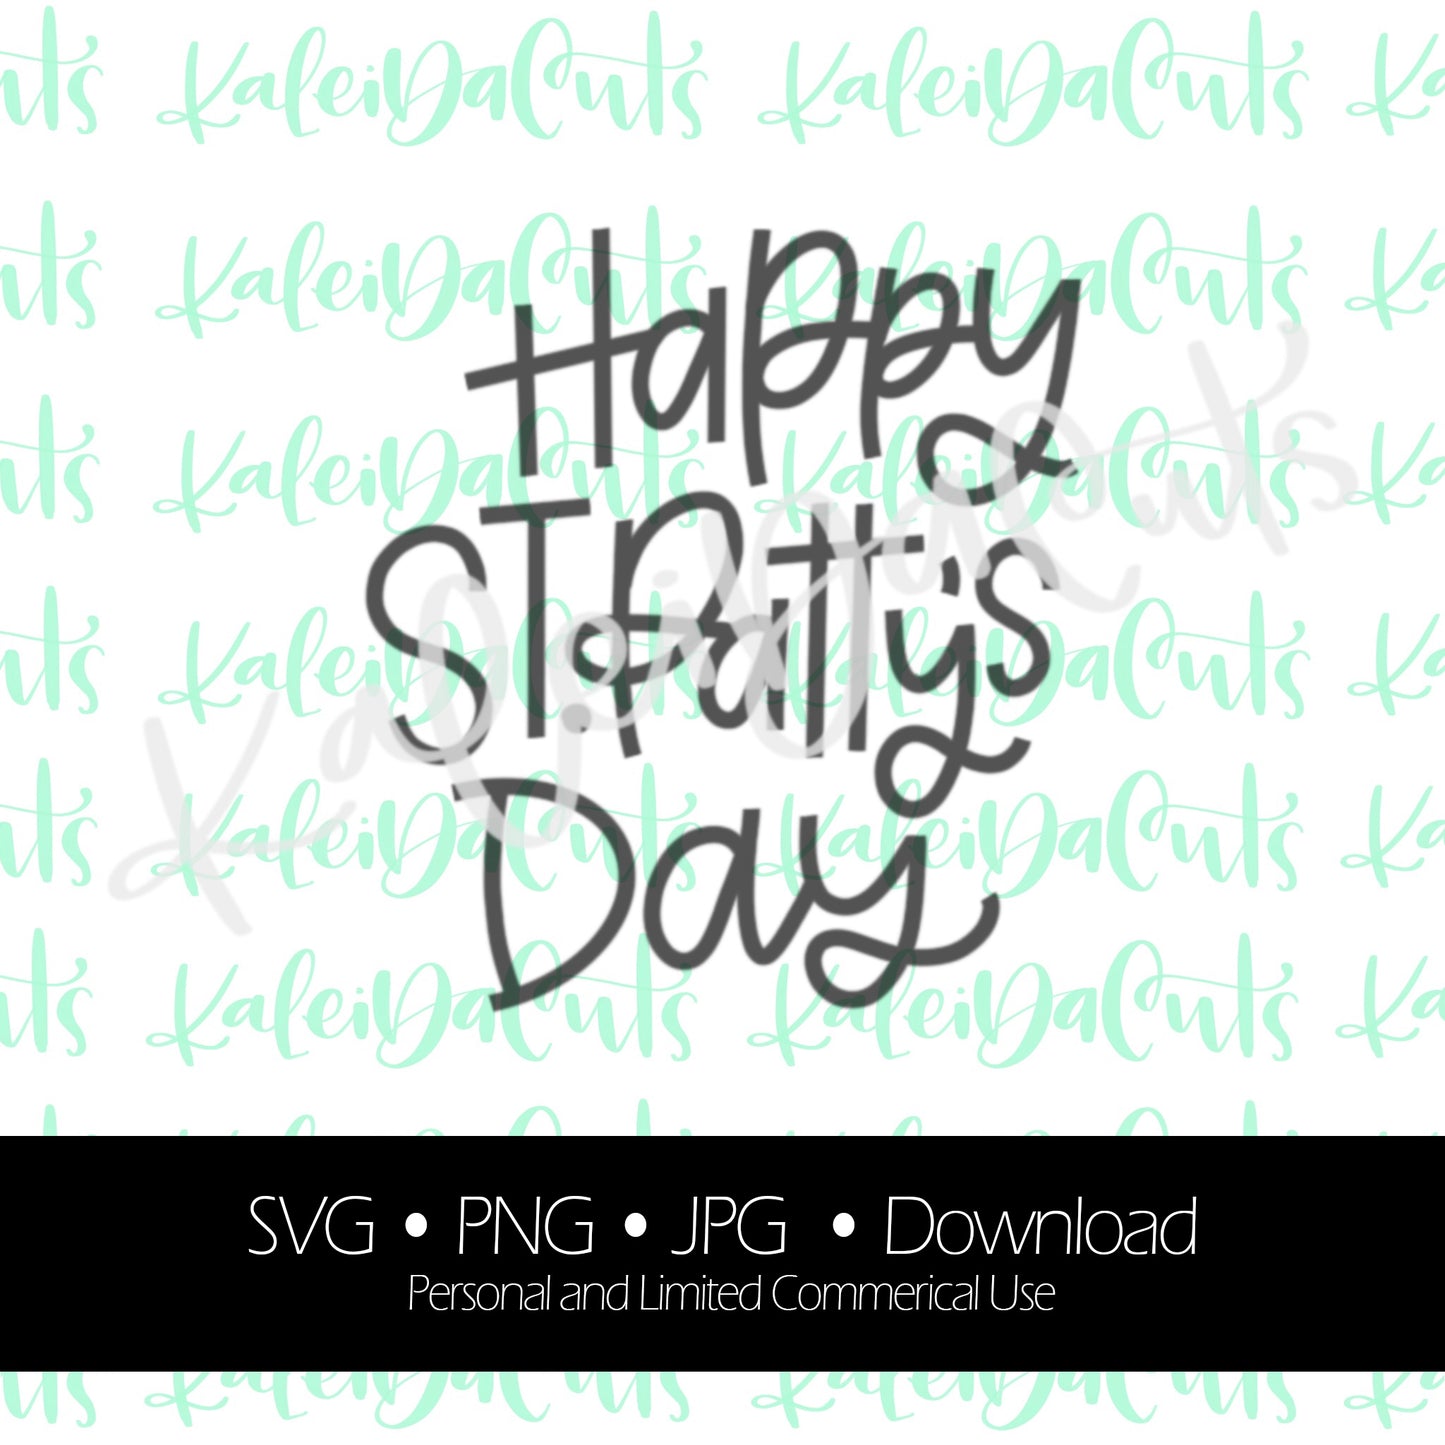 Happy St Pattys Day Lettering. Digital Download. SVG.